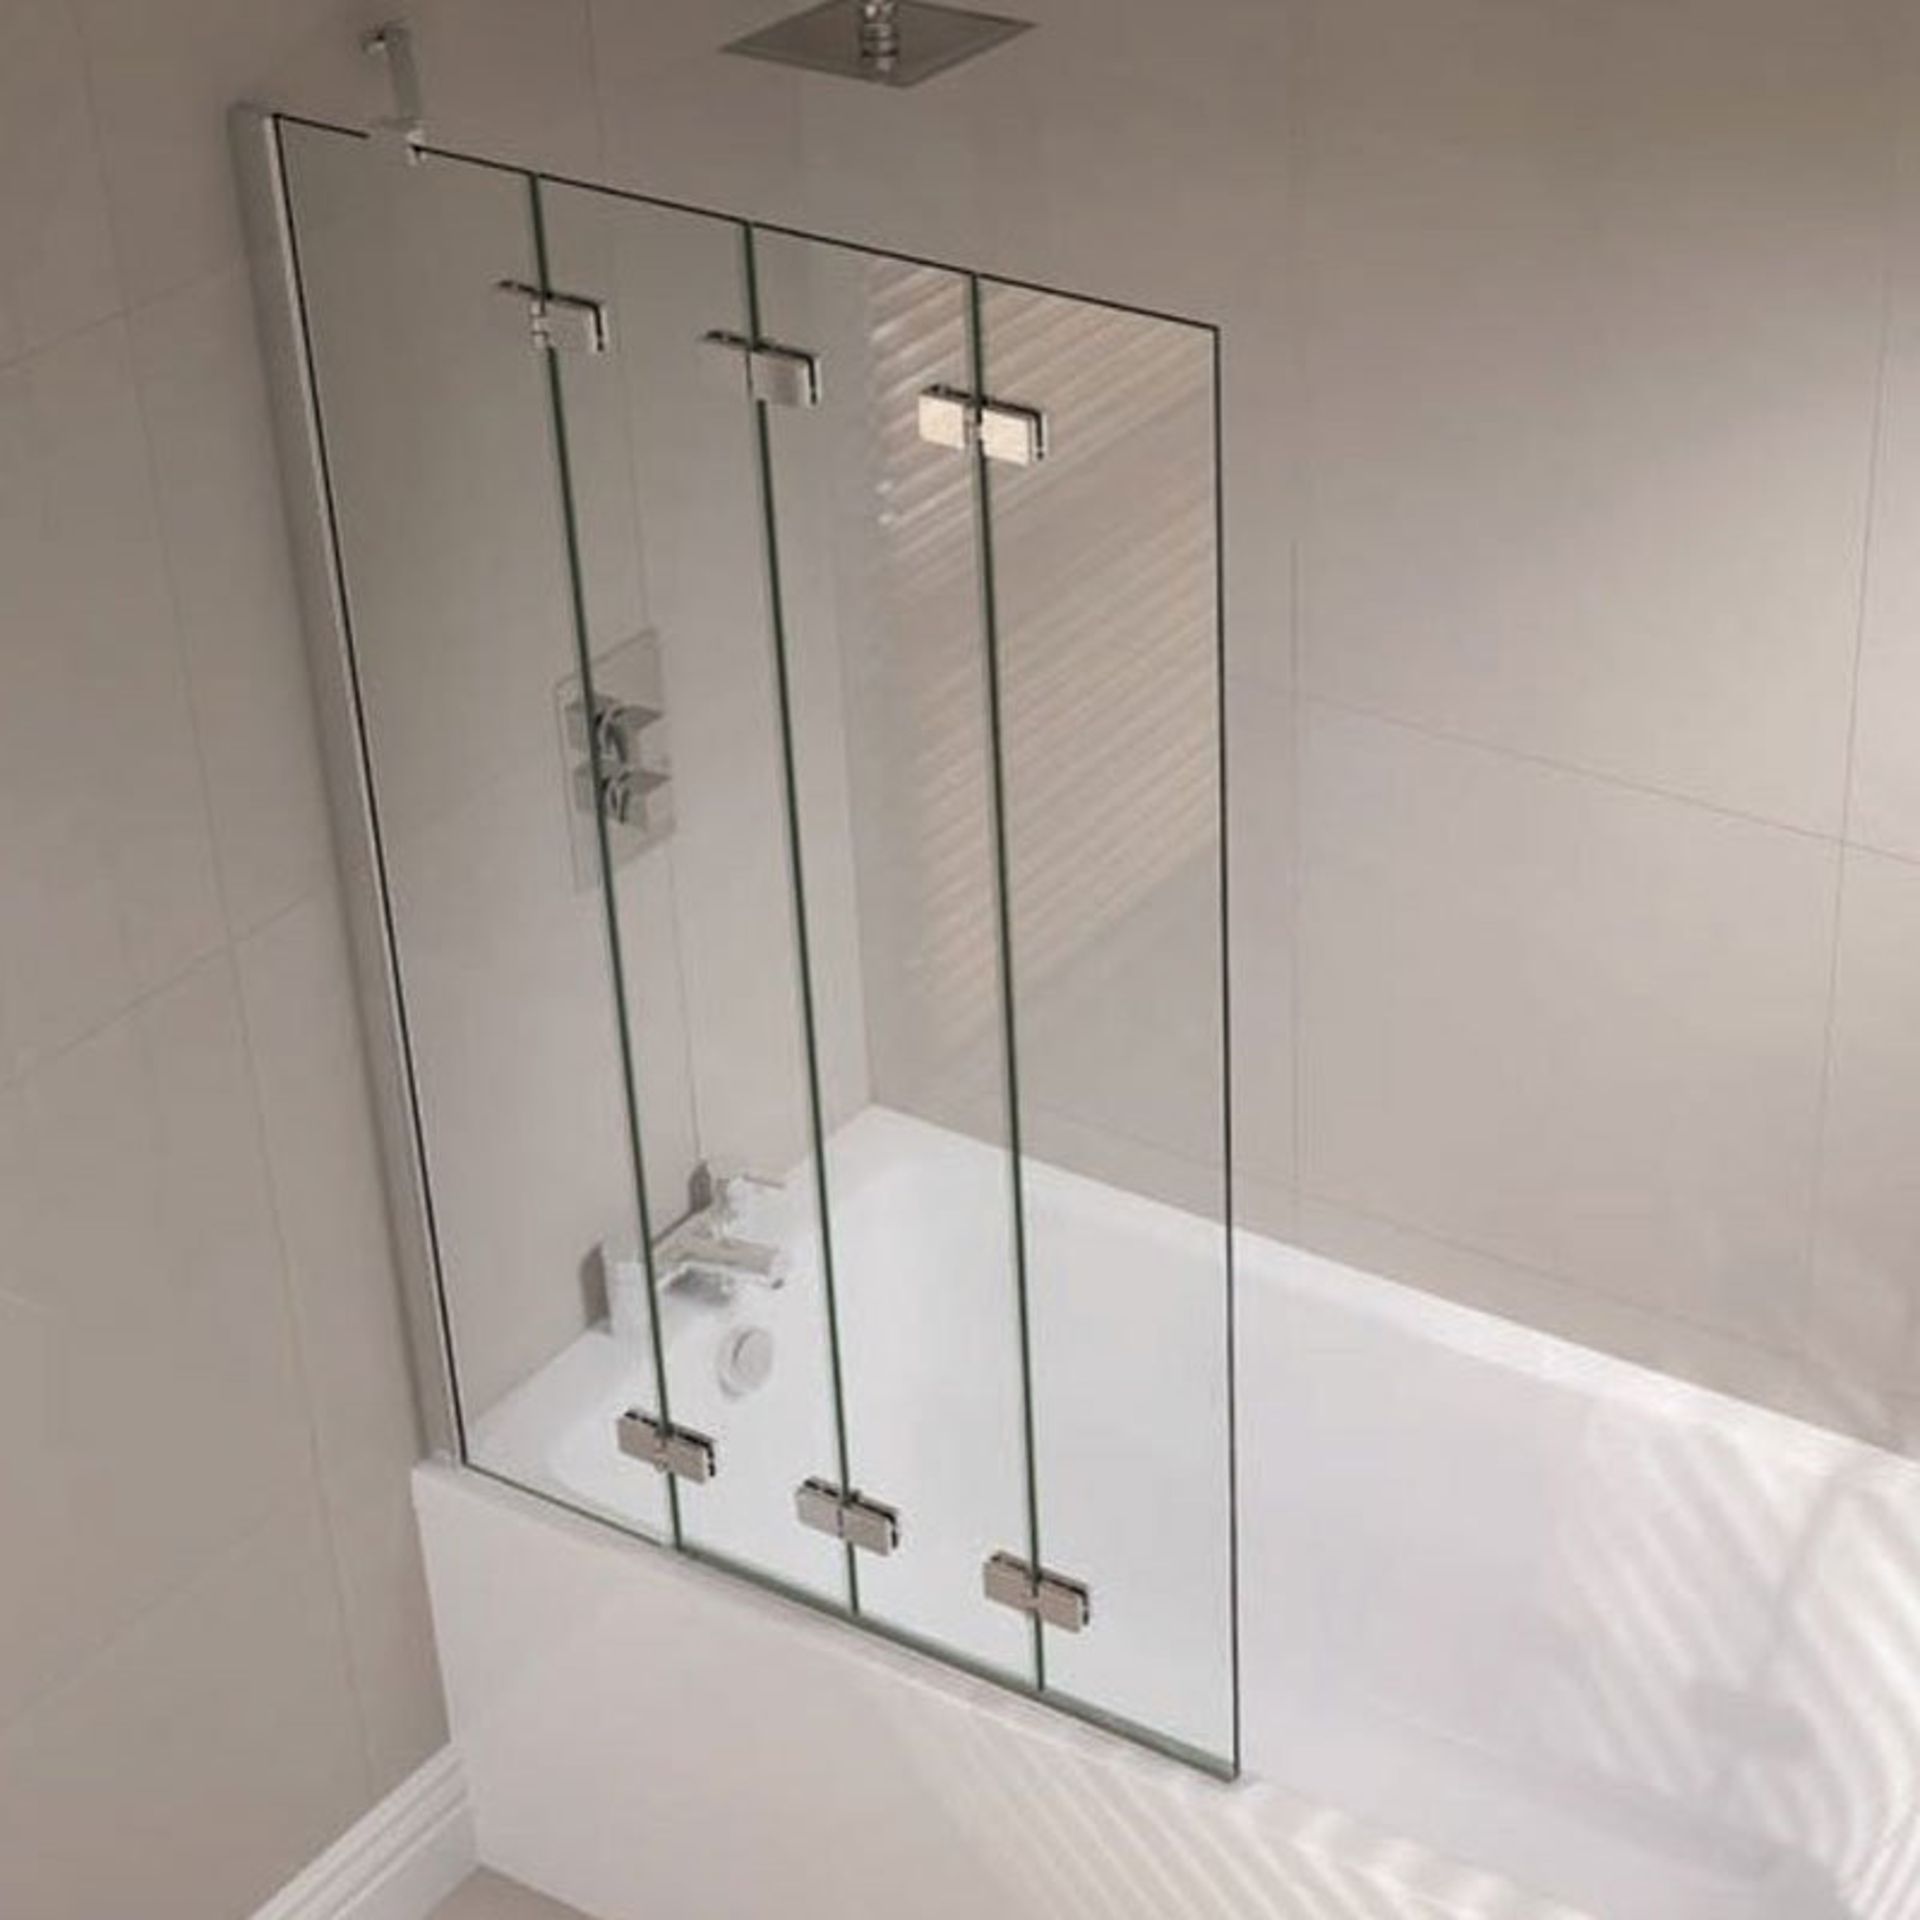 NEW (REF185) 4 Fold Bath Screen. RRP £289.99. 4mm Safety Glass, Clean & Clear Glass Treatment...